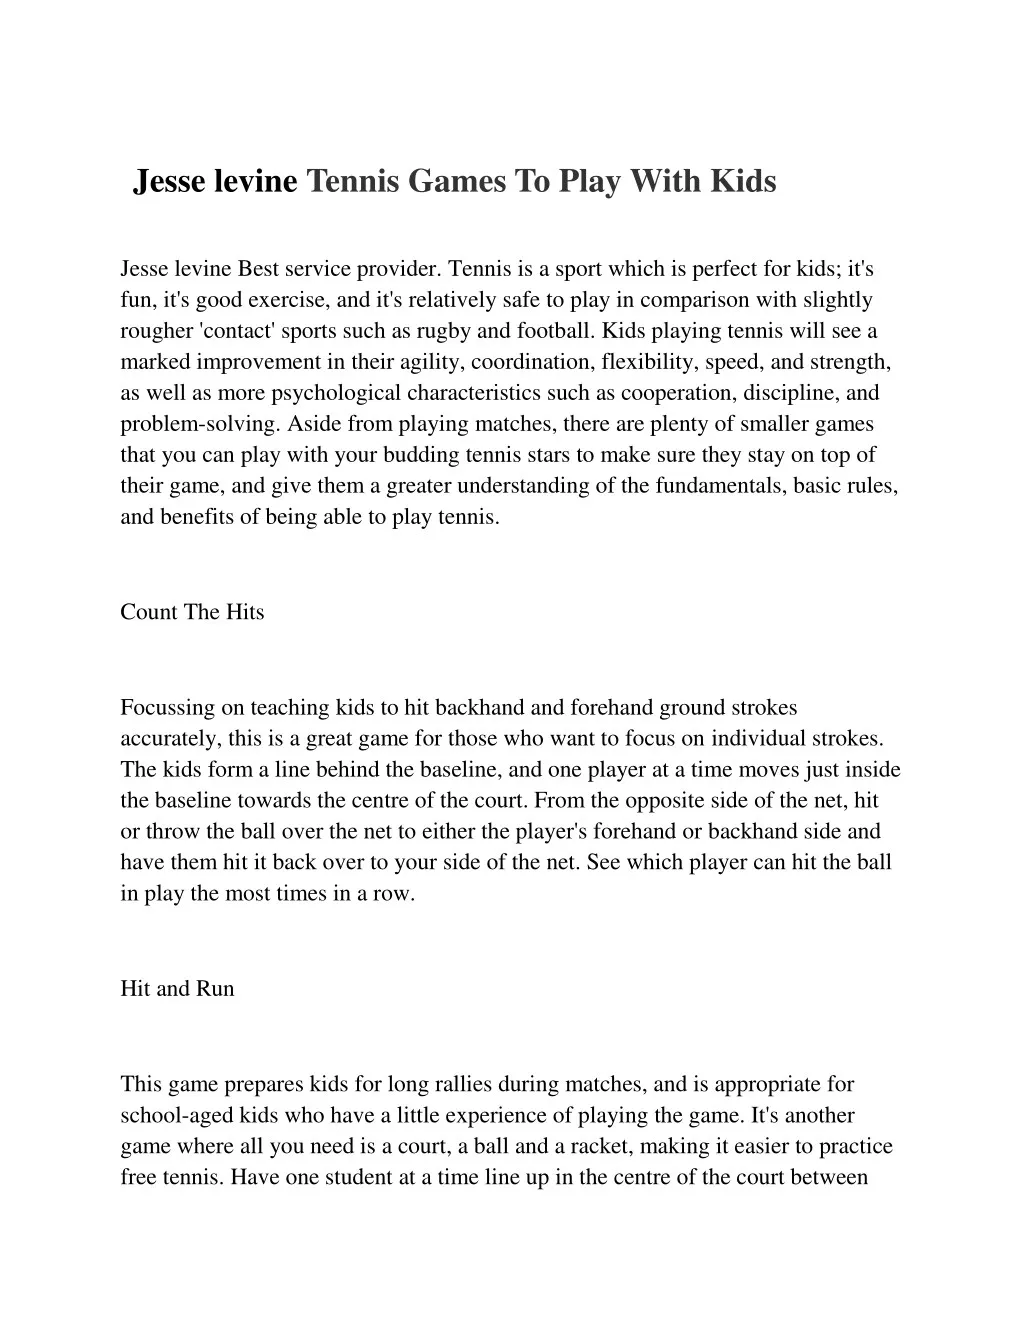 jesse levine tennis games to play with kids